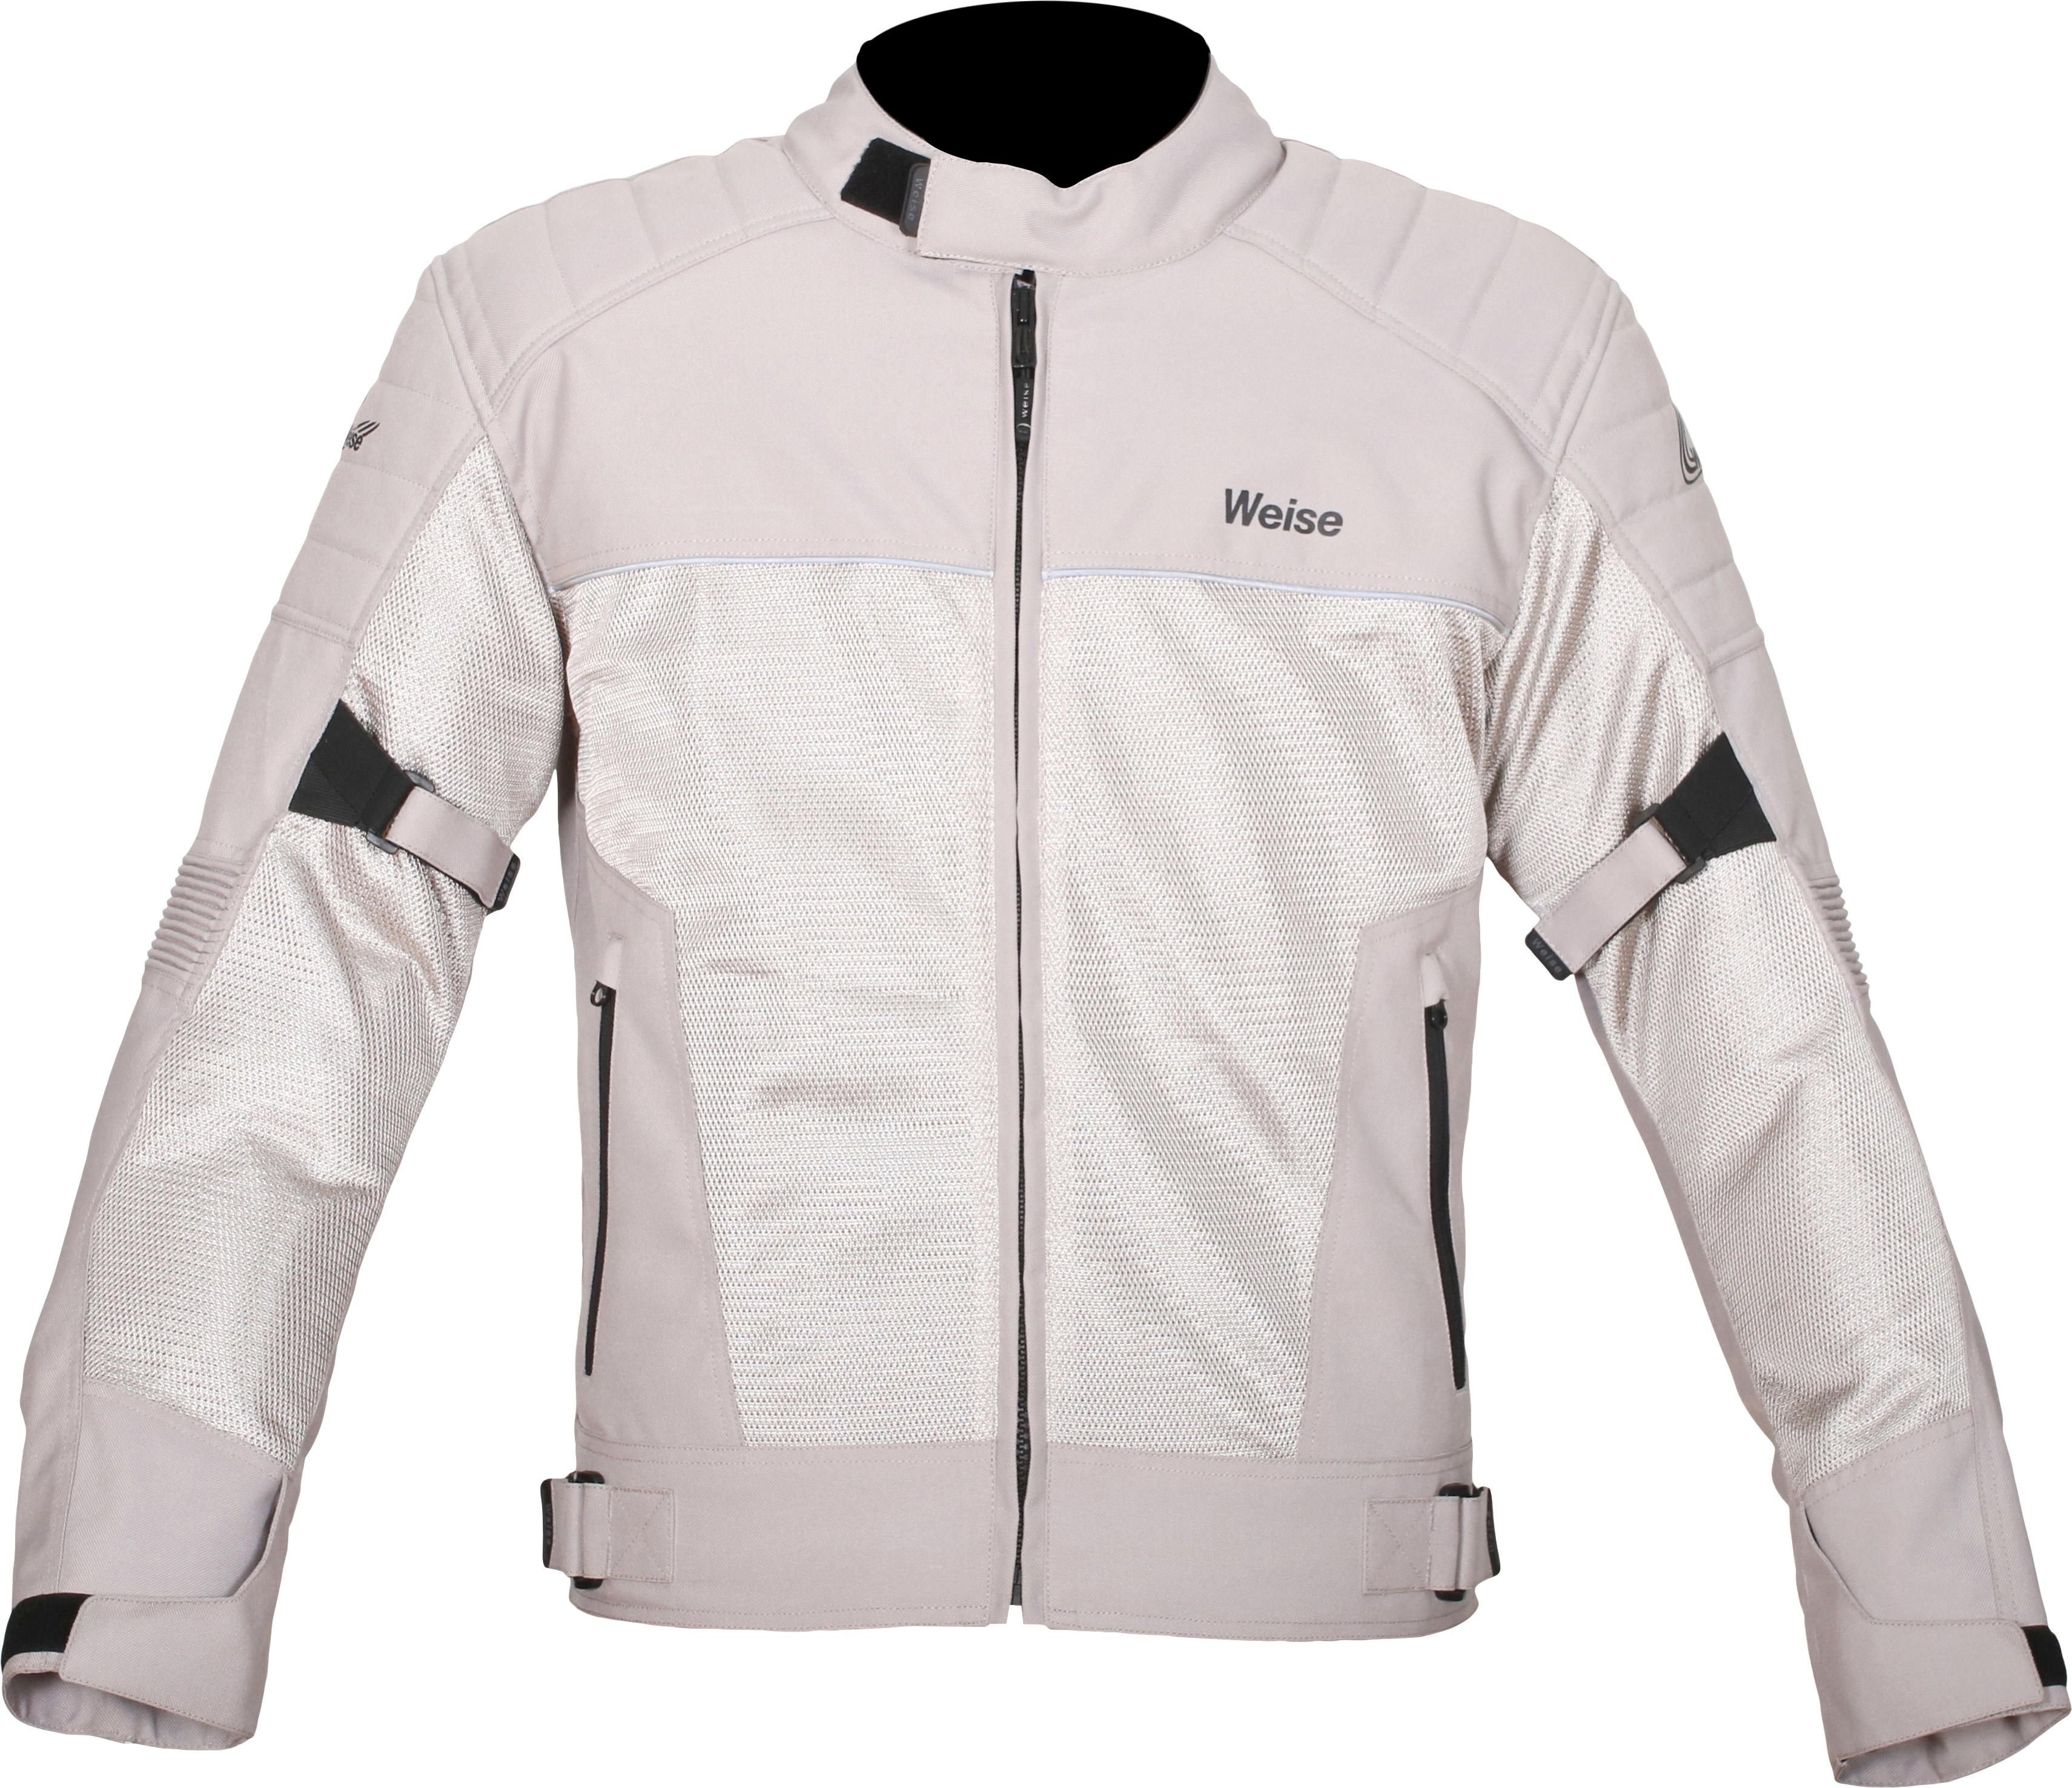 Weise Scout Motorcycle Jacket - Stone, 5Xl